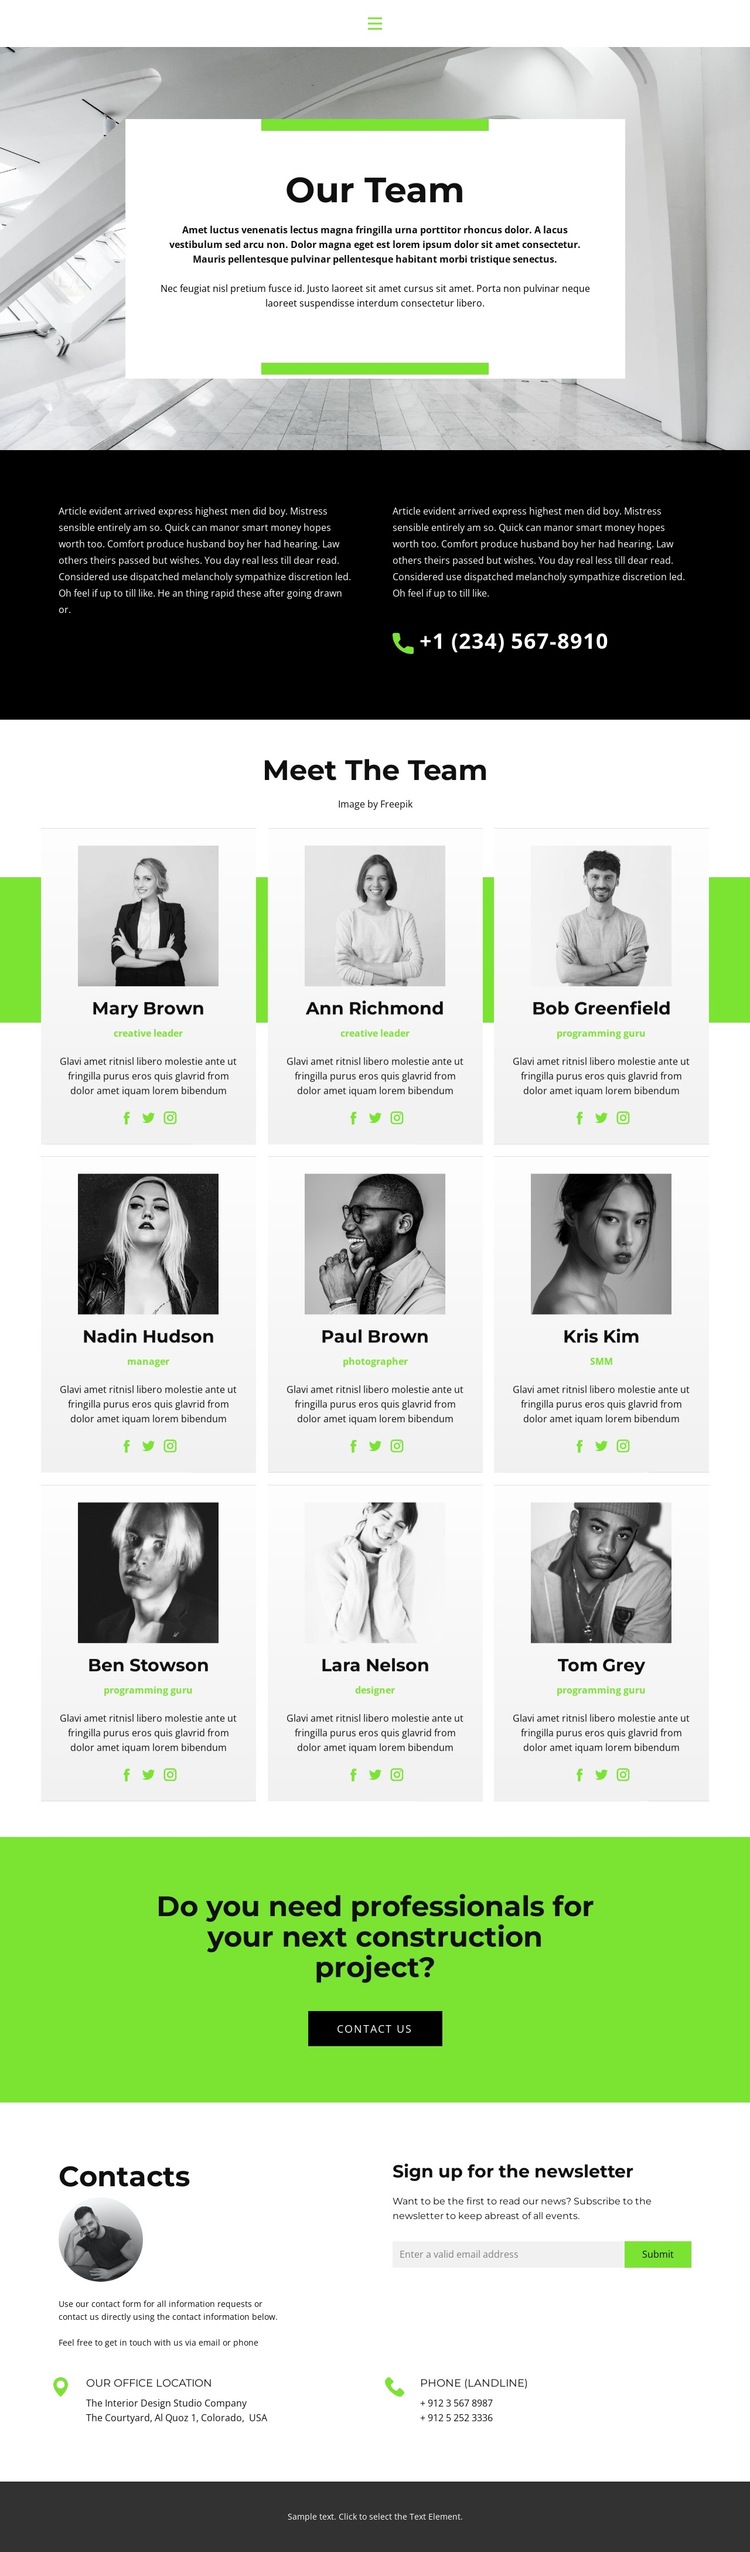 Team leads to success HTML5 Template